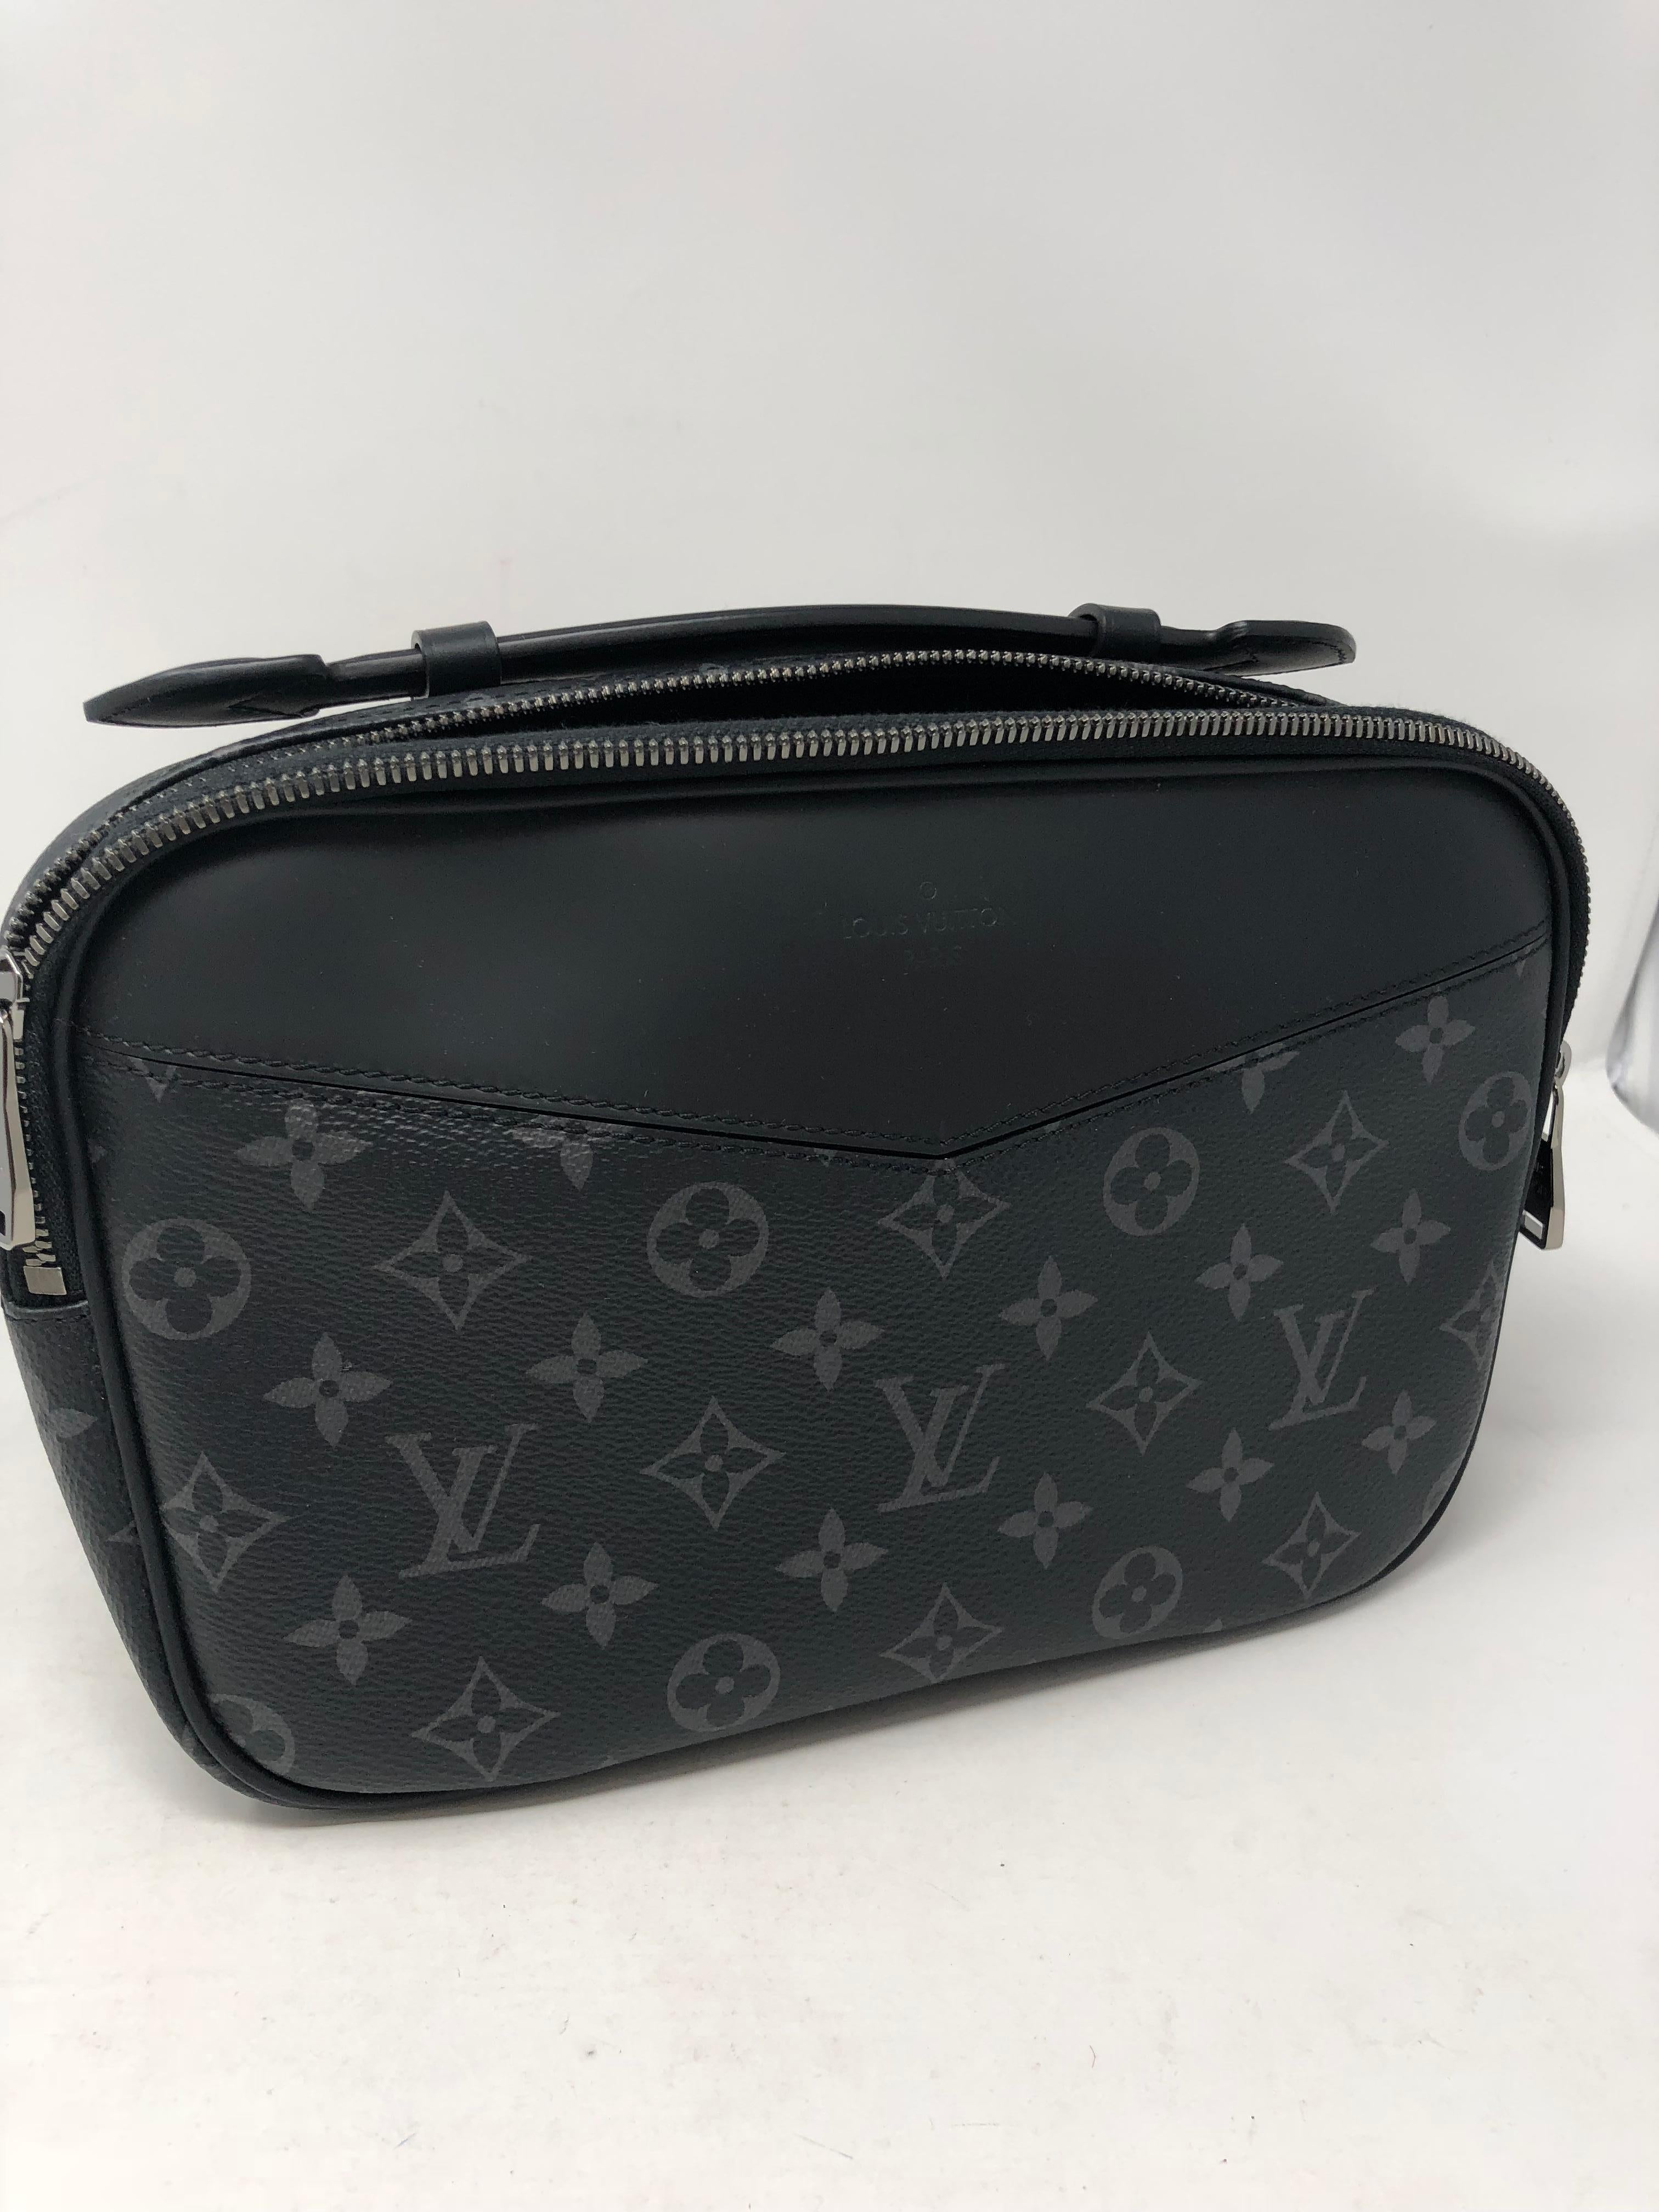 Louis Vuitton Graphite Mono Bum Bag. Brand New condition. Limited and Sold Out. Comes with dust cover and box. Most wanted Fanny pack. Adjustable and can be worn across the torso as a body bag. Great for travel and every day wear. Guaranteed